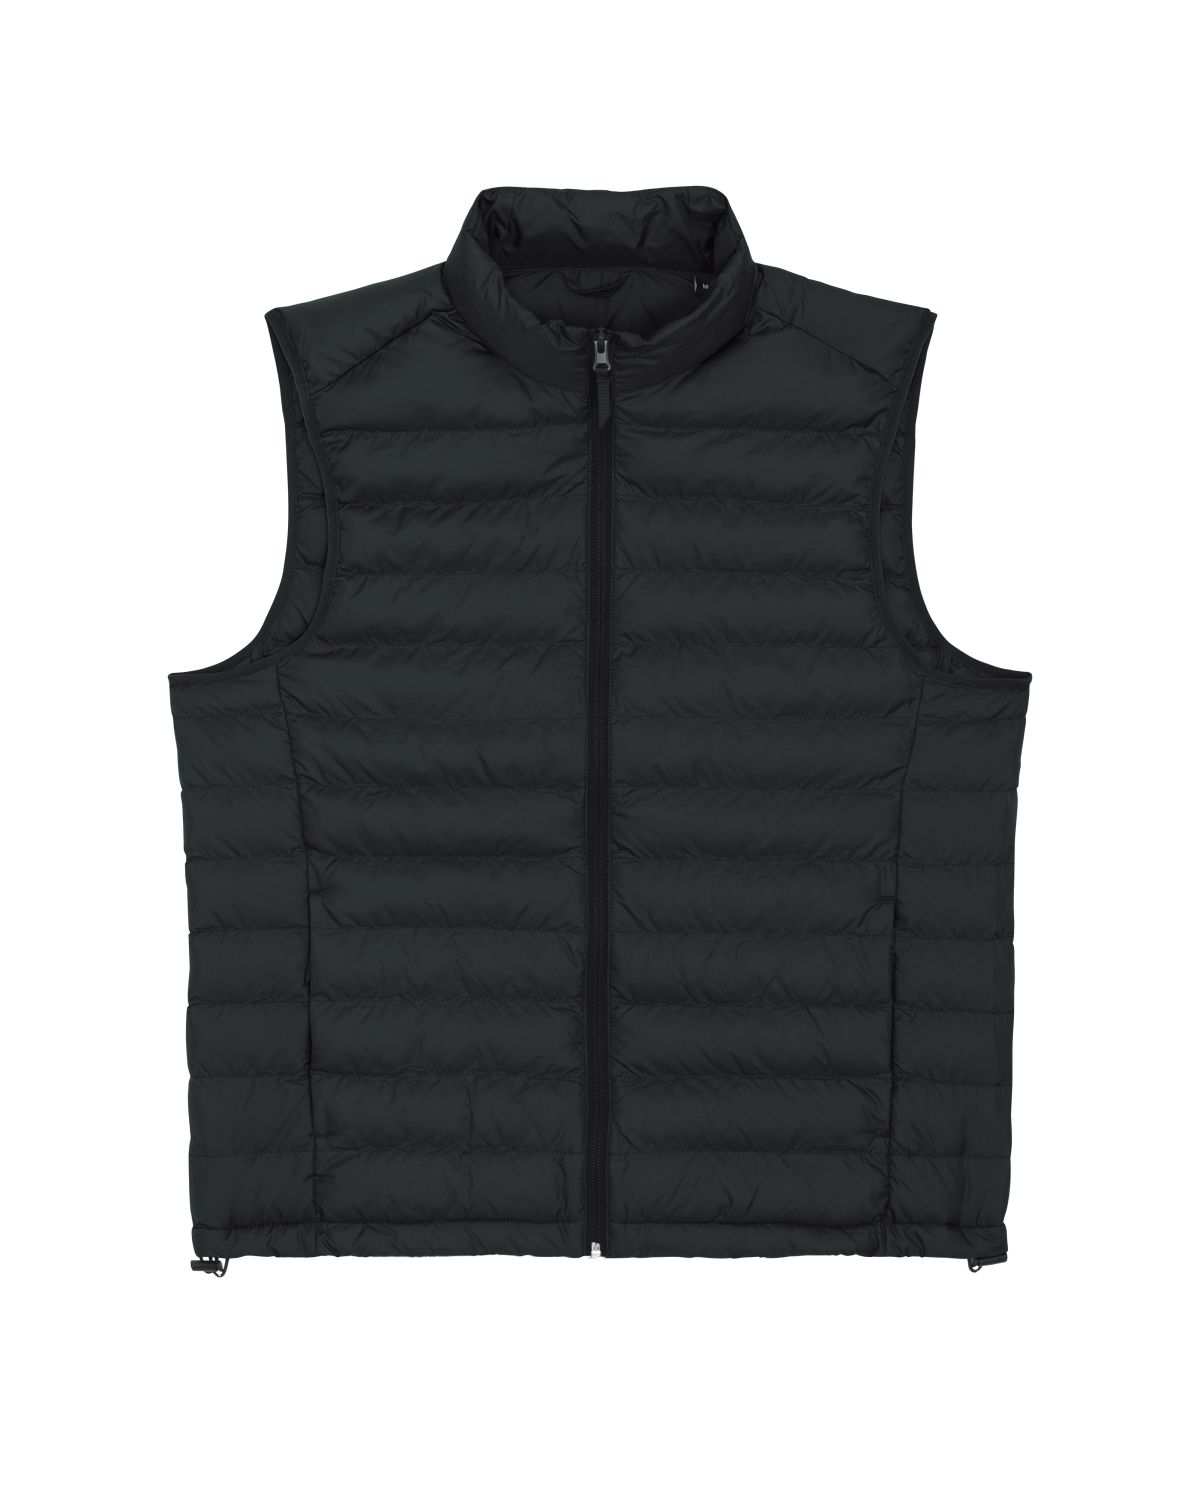 Customize your own sustainable vest. Main, padding, and lining are all made of 100% recycled polyester, Fluorine- free